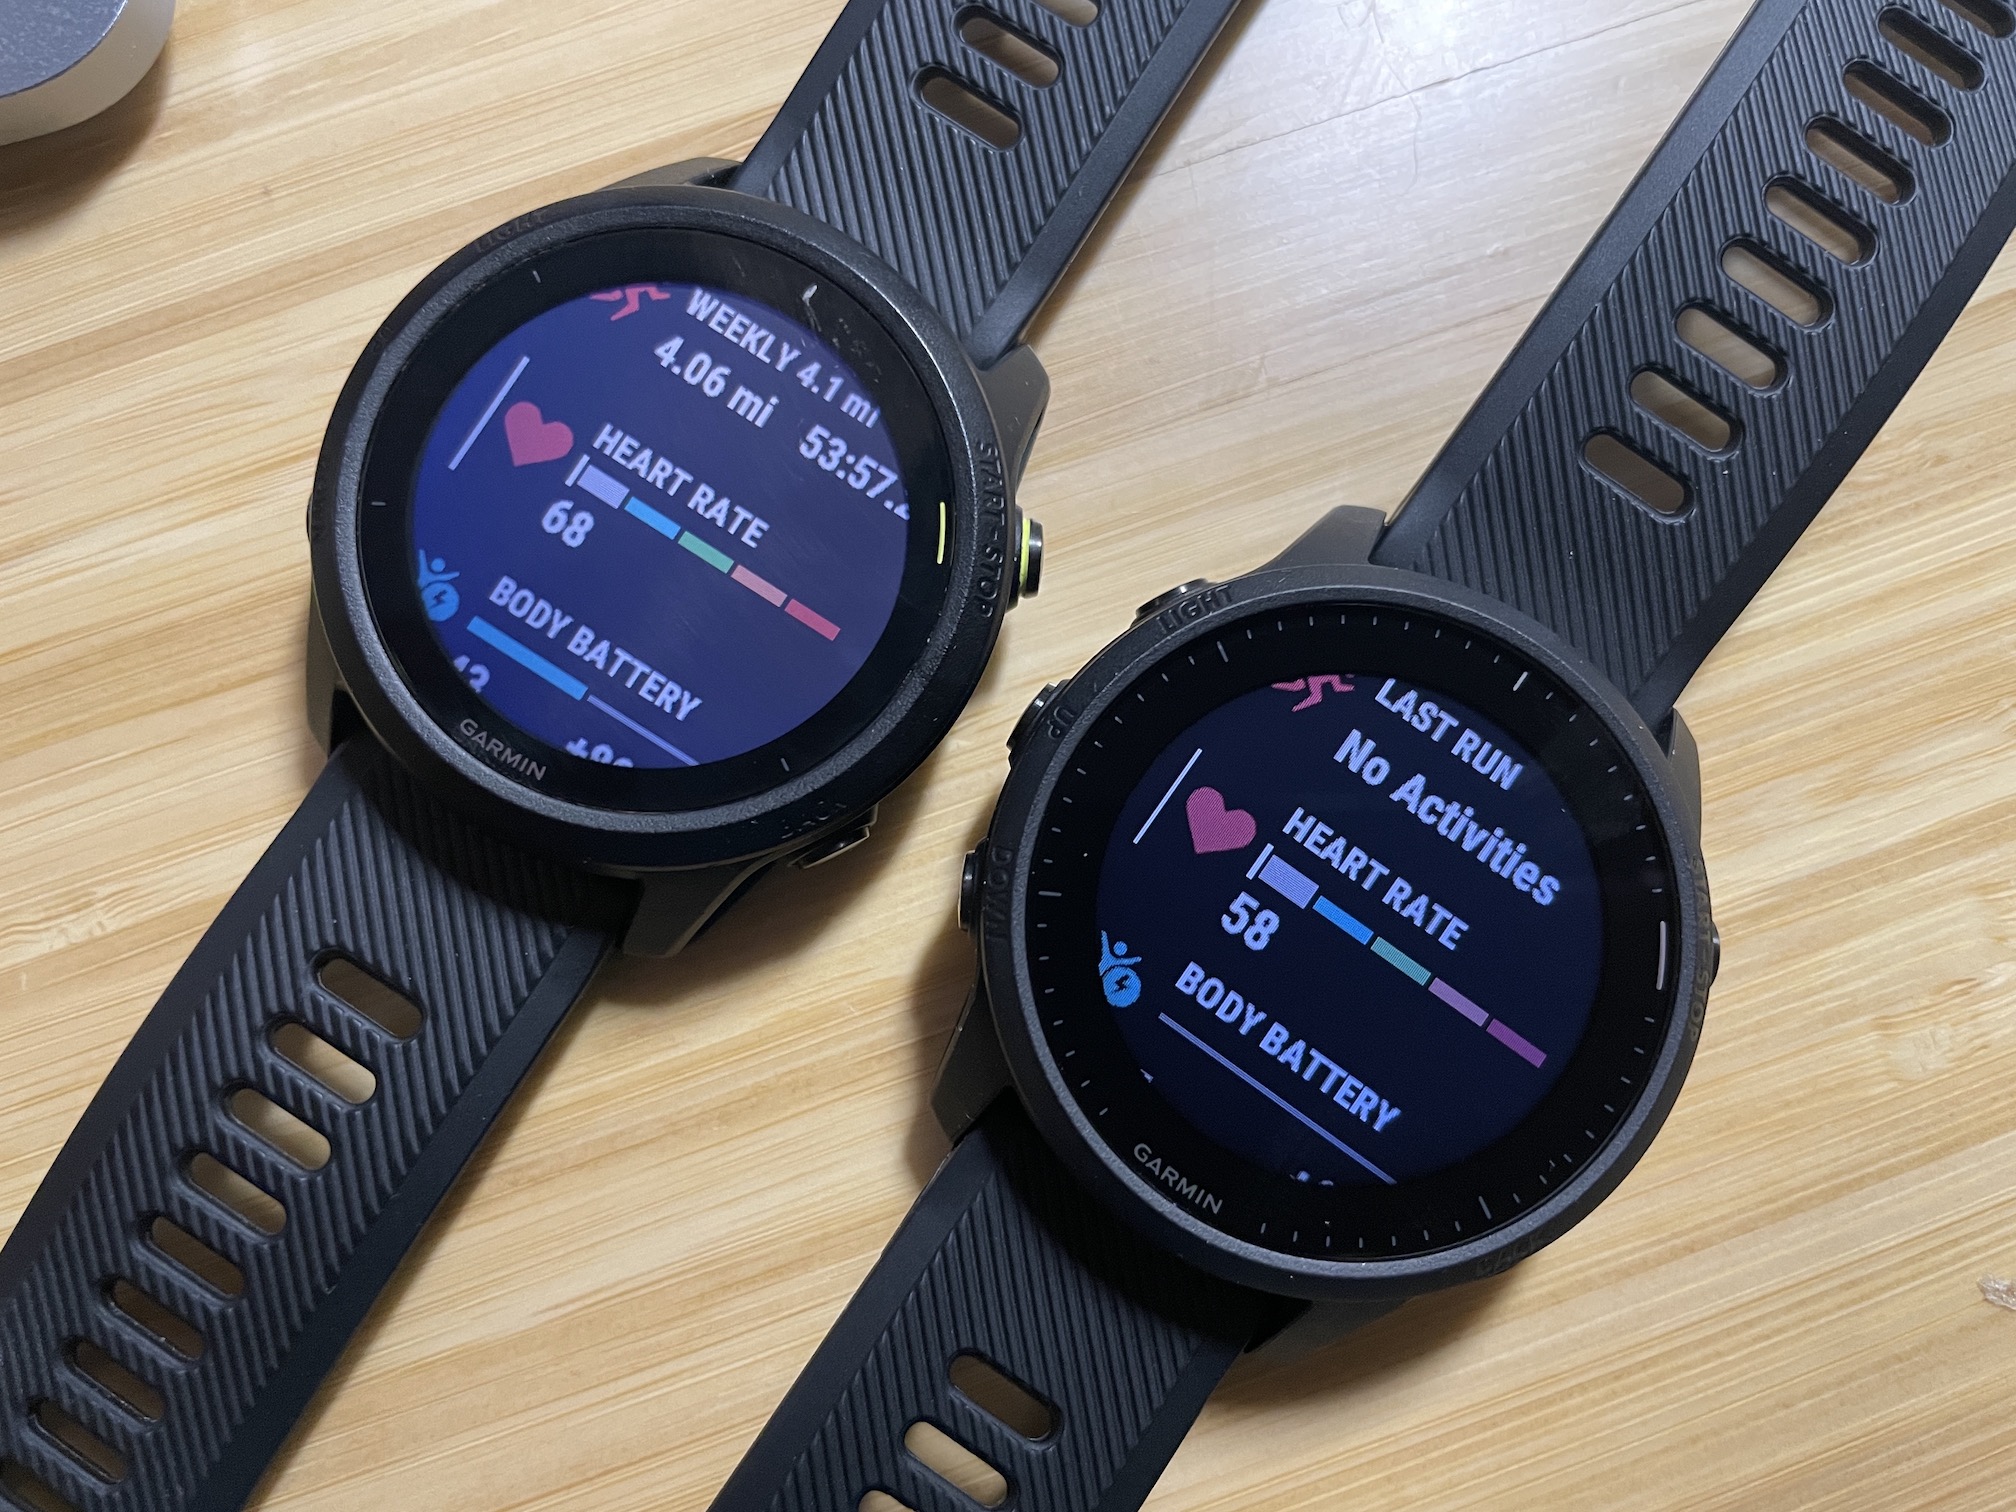 Hands On With Garmin's announced Forerunner LTE and Forerunner Ars Technica